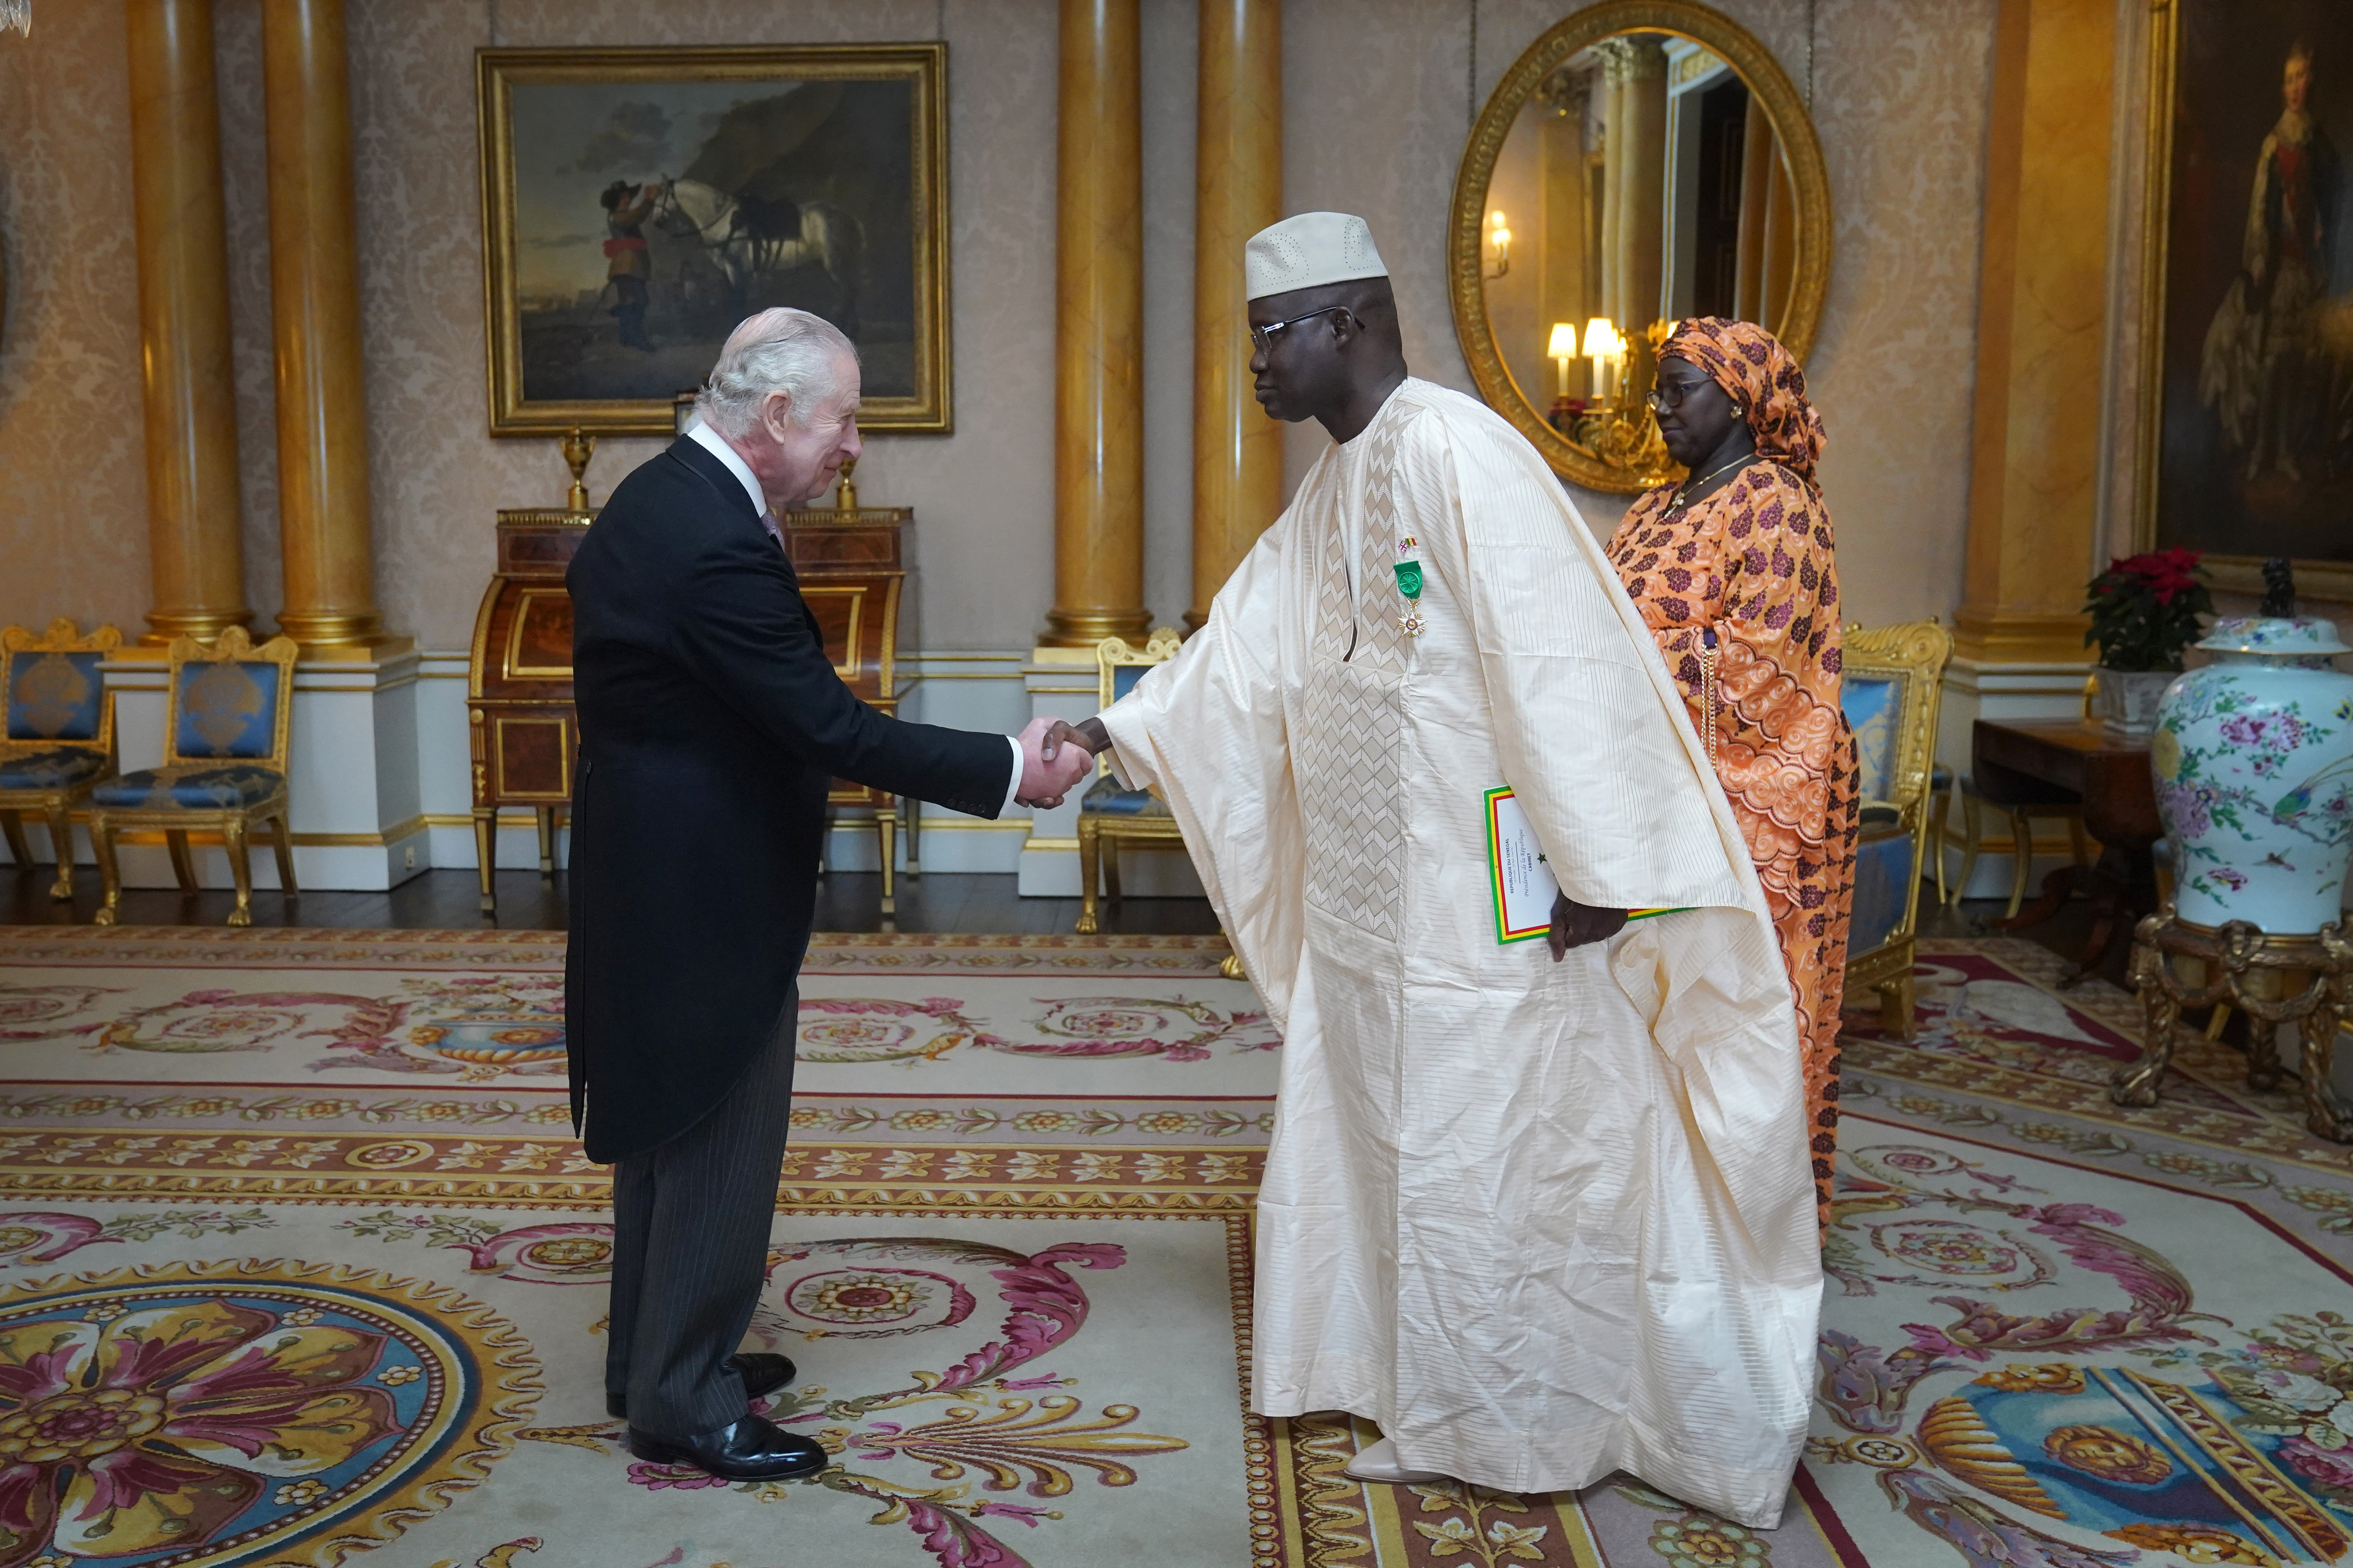 The Ambassador of Senegal, General Cheikh Wade, presents his credentials to King Charles III during a private audience at Buckingham Palace in London on December 13, 2023. | Source: Getty Images